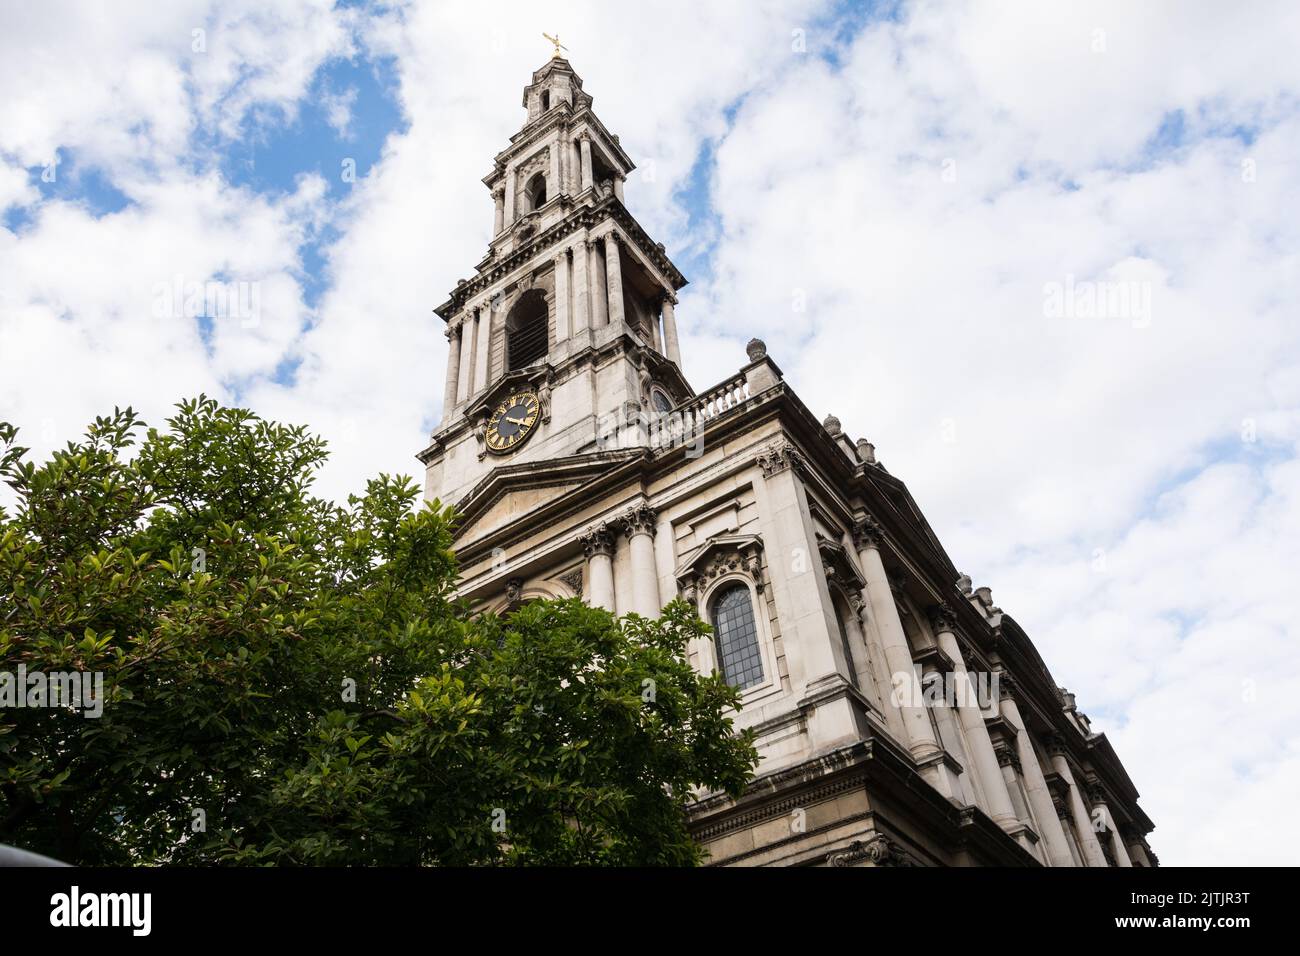 Closeup of the tower of Sir Christopher Wren's St Clement Danes church, Strand, London, England, UK Stock Photo